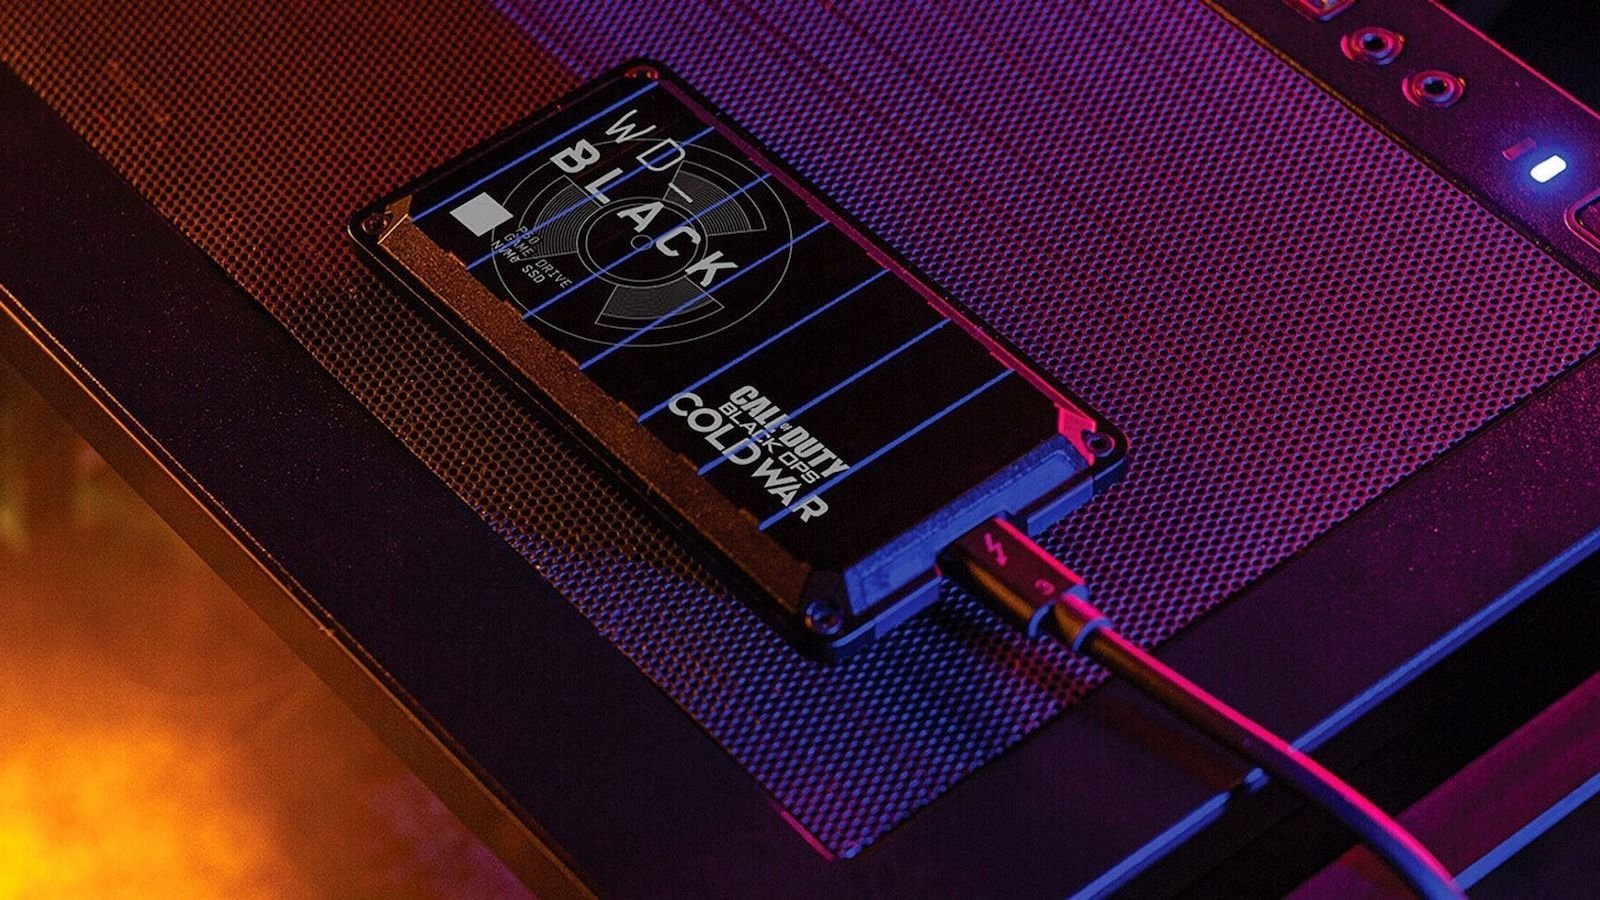 Western Digital Call of Duty: Black Ops SSD can reach speeds up to 2000 MB/s